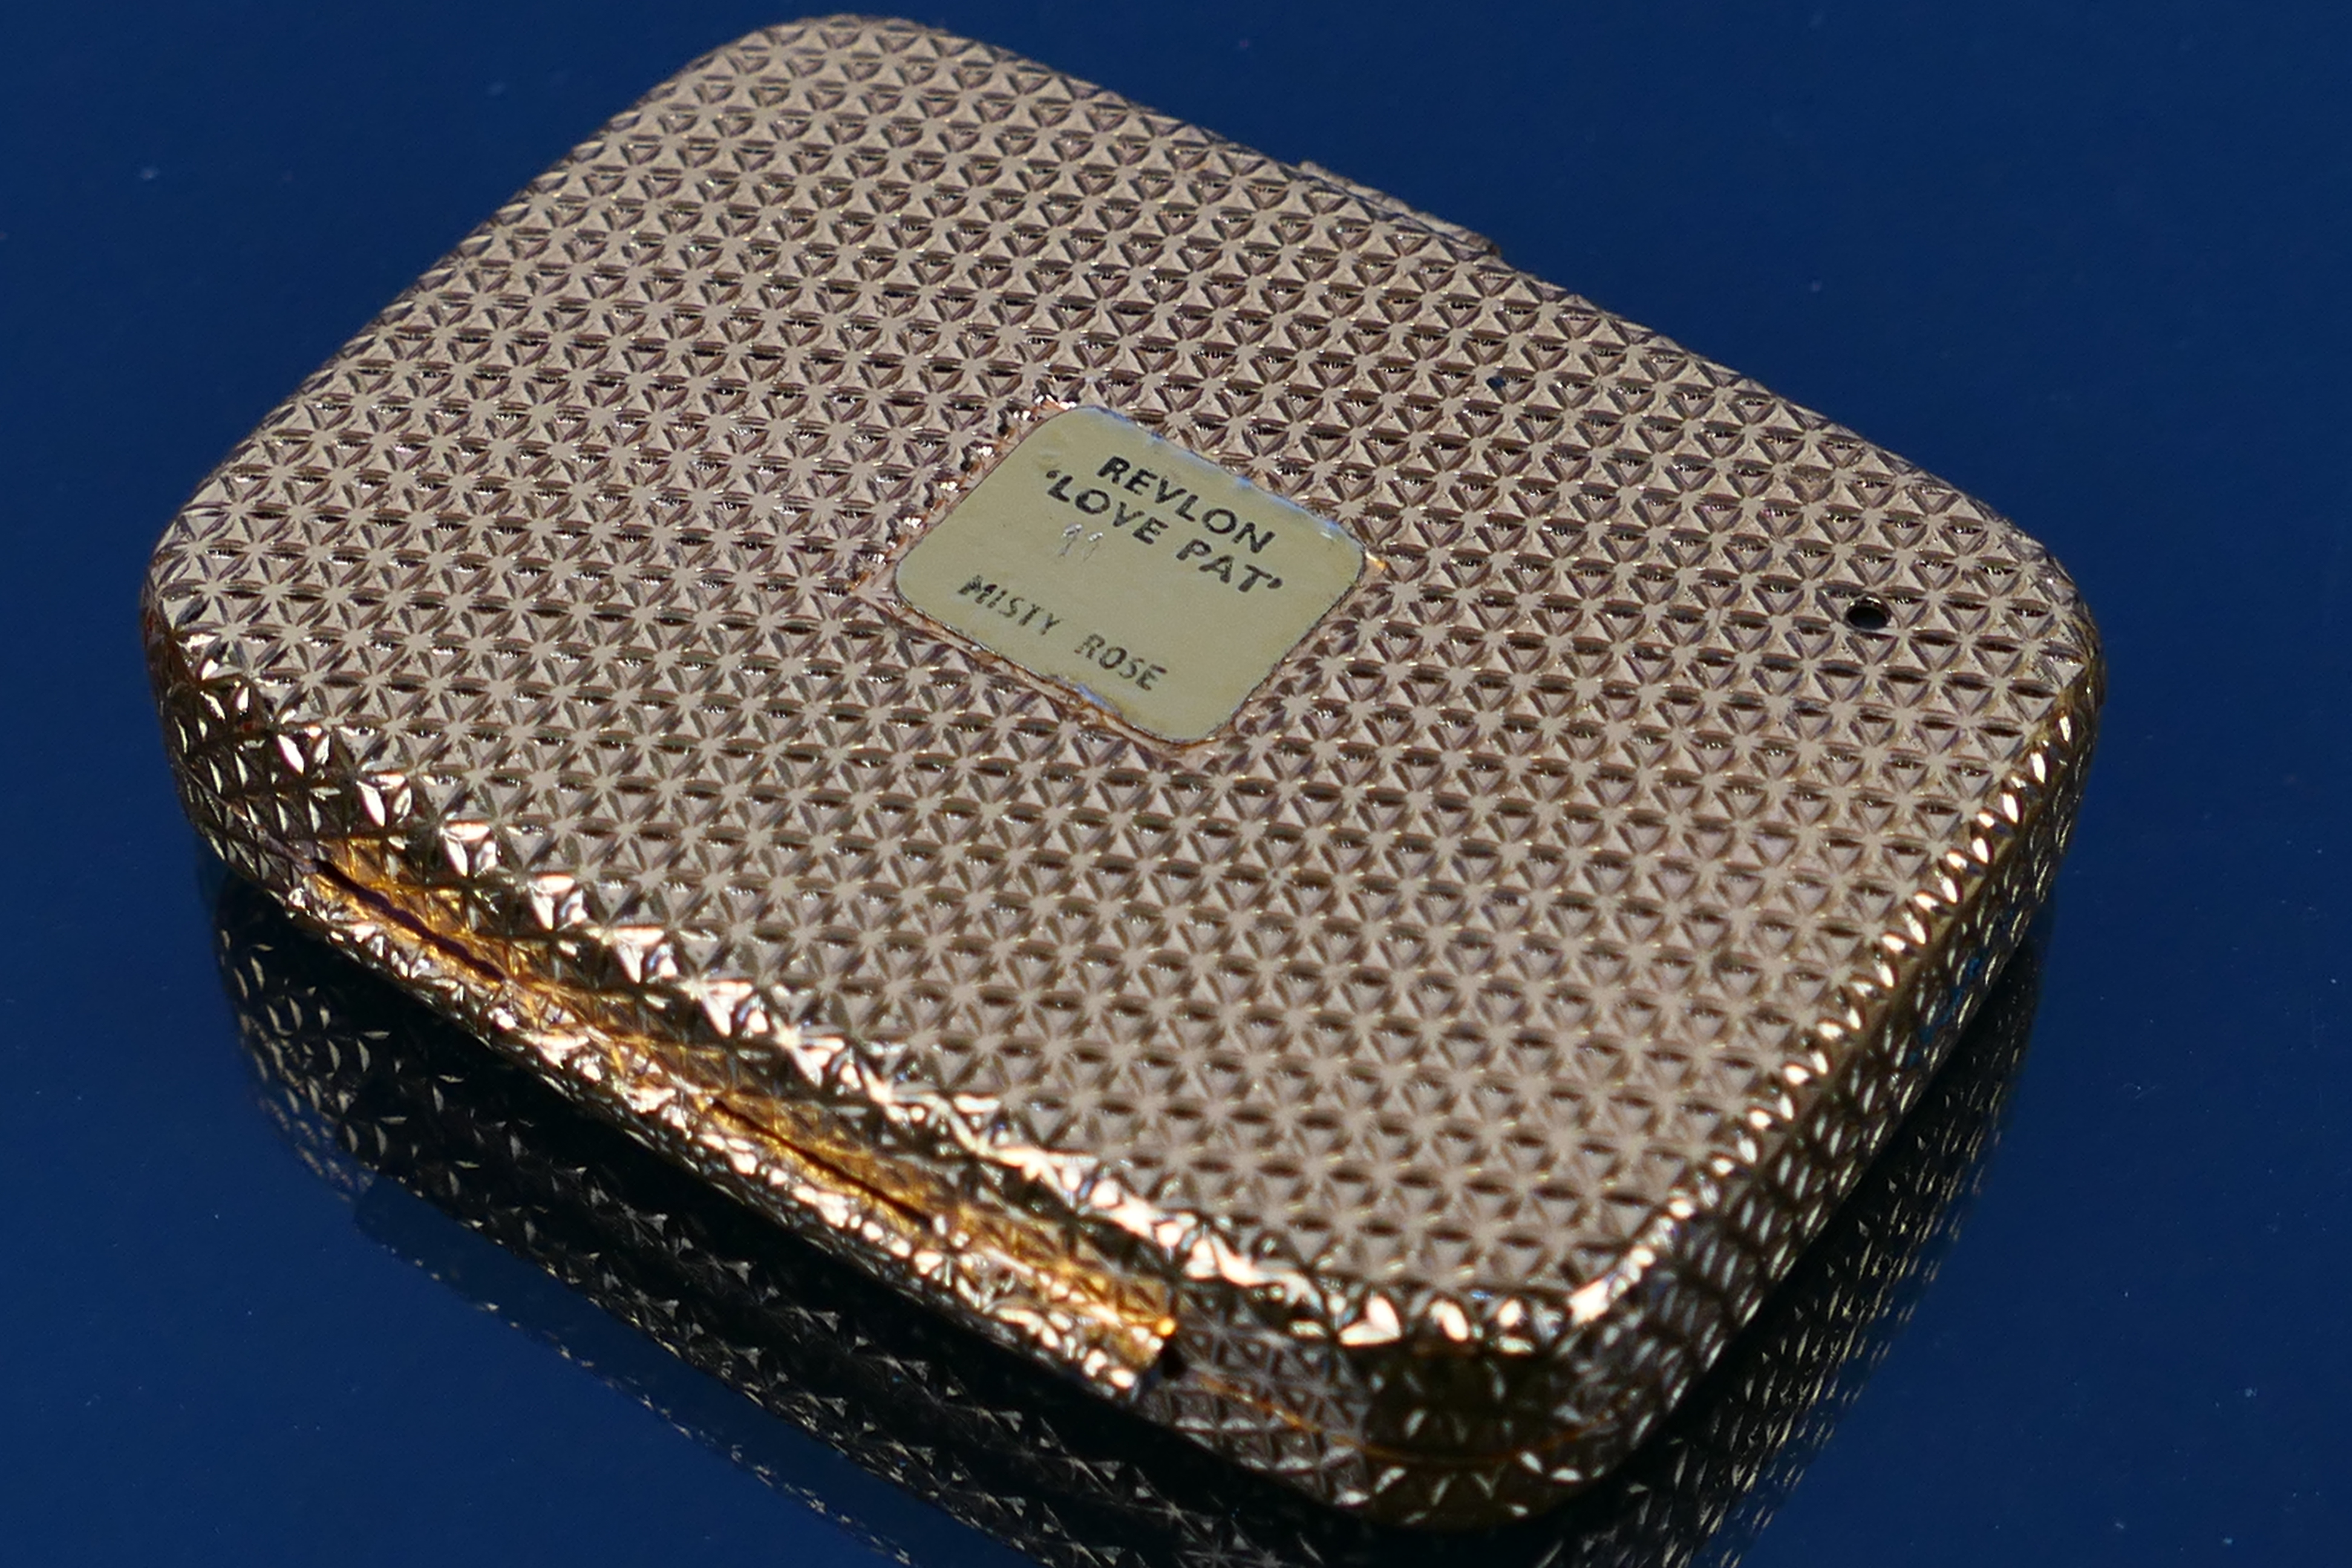 Estee Lauder - Revlon - A vintage Estee Lauder Honey Glow compact with a mother of pearl style - Image 6 of 9